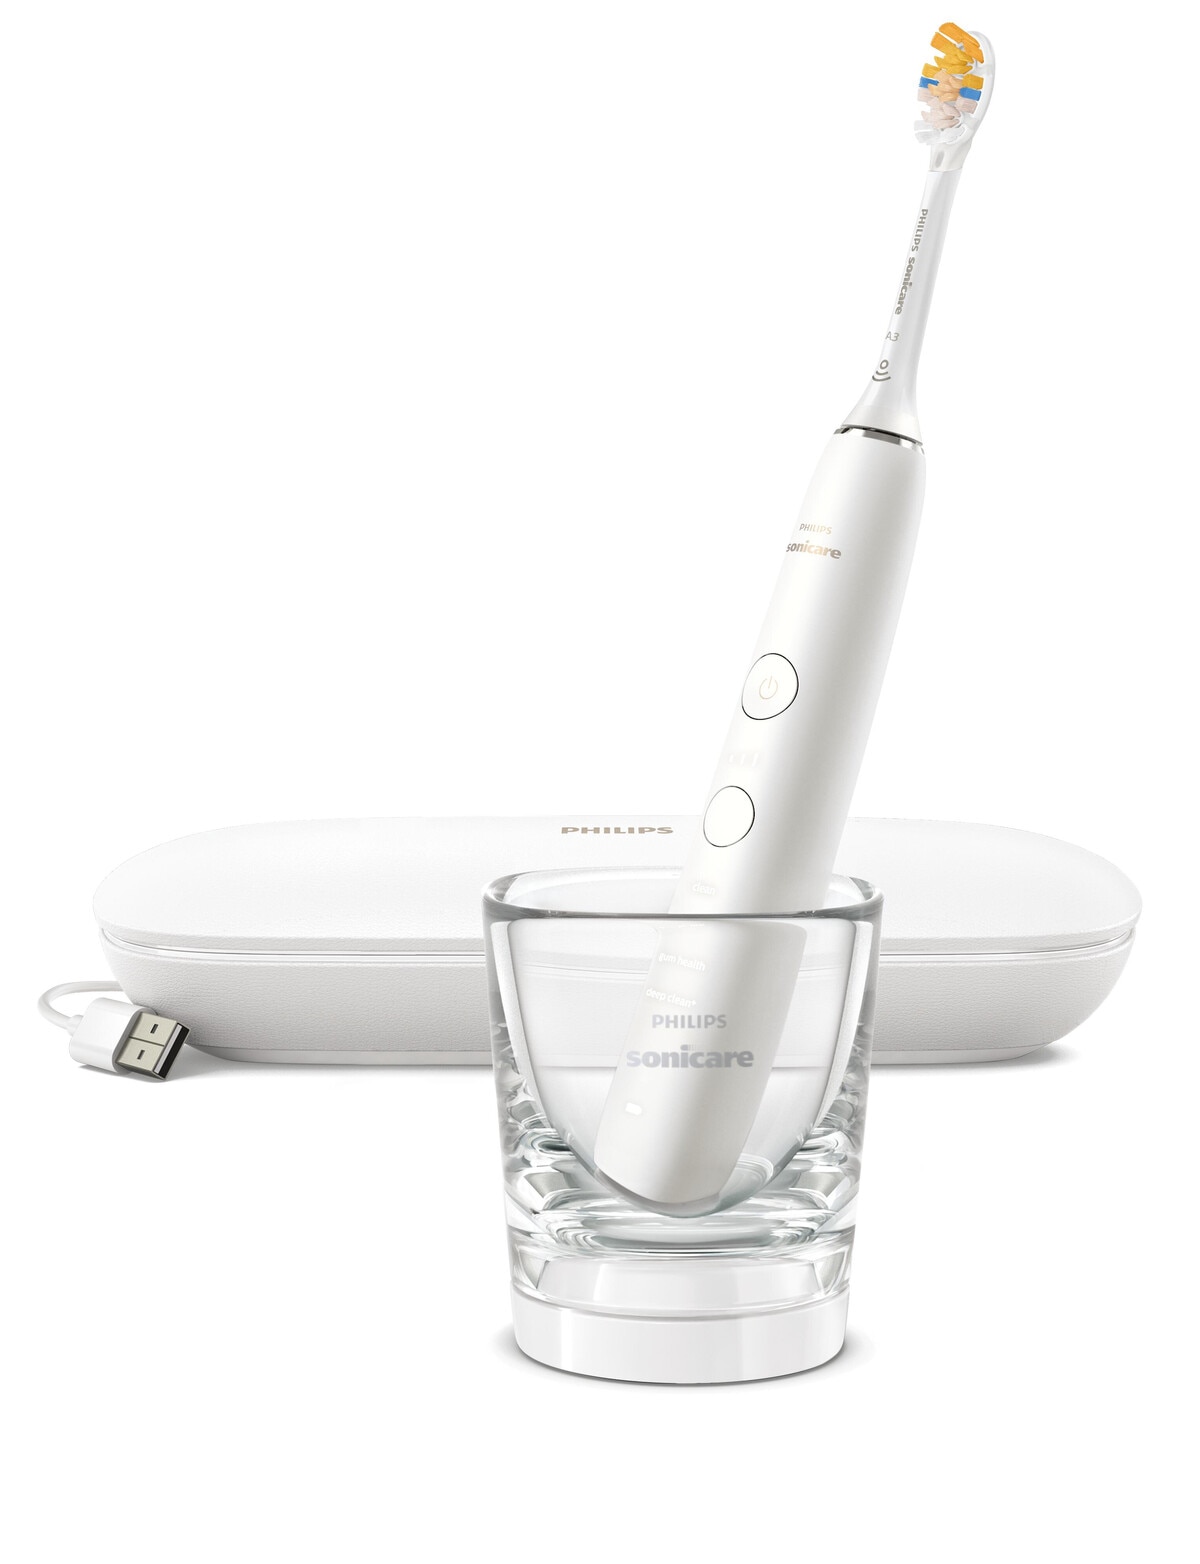 Philips Sonicare DiamondClean 9000 Electric Toothbrush, White, HX9912/63 -  Electric Toothbrushes